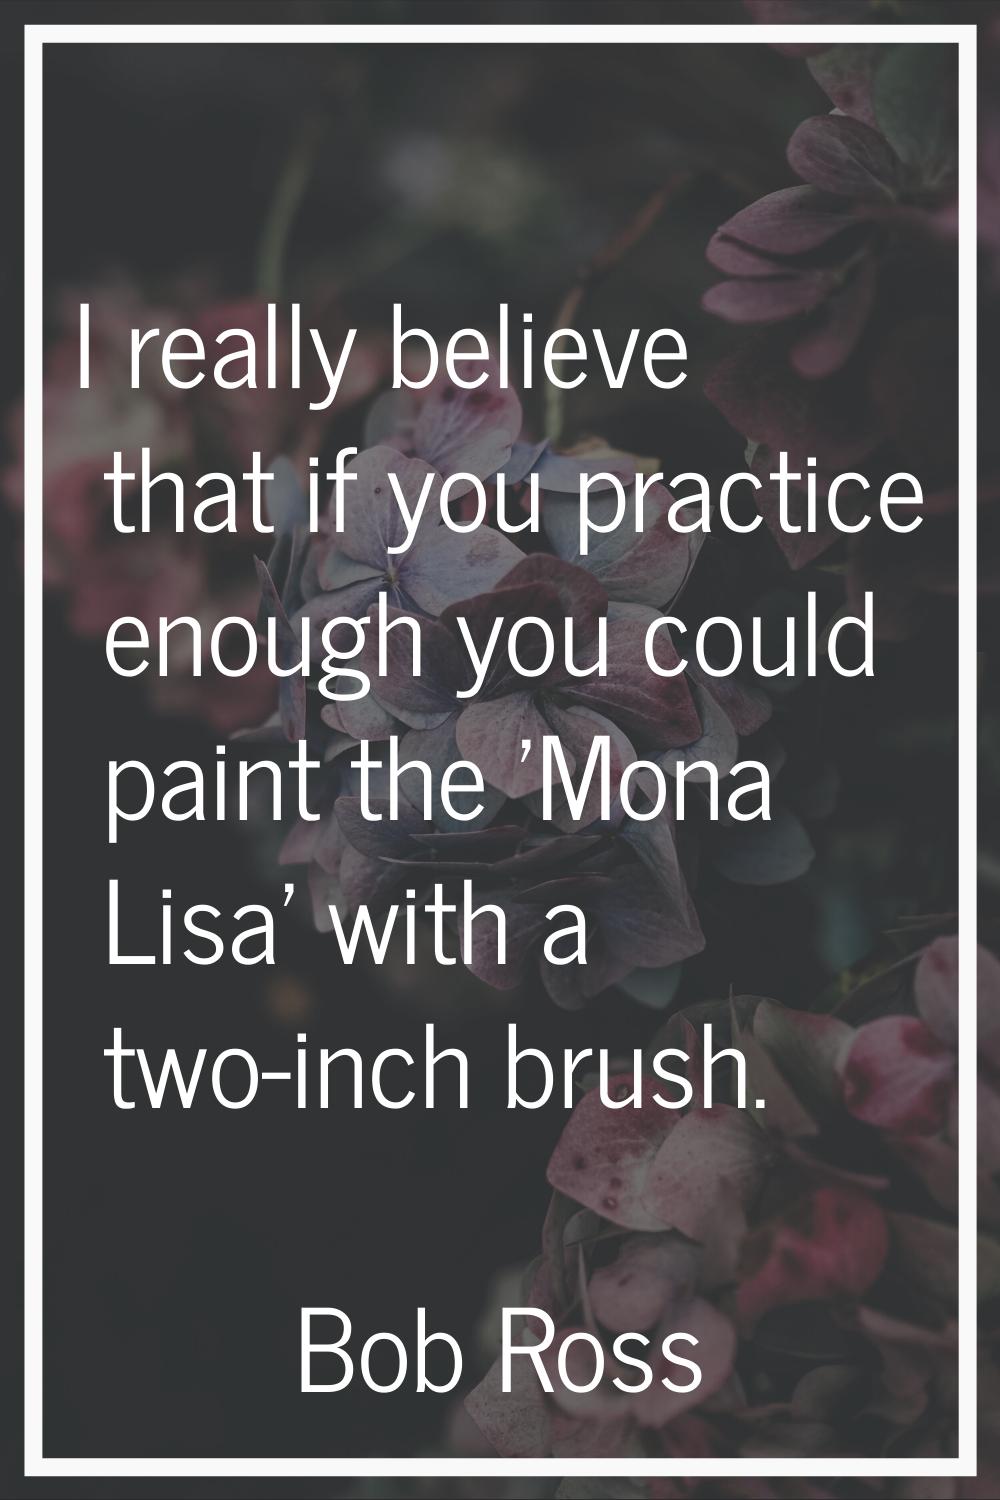 I really believe that if you practice enough you could paint the 'Mona Lisa' with a two-inch brush.